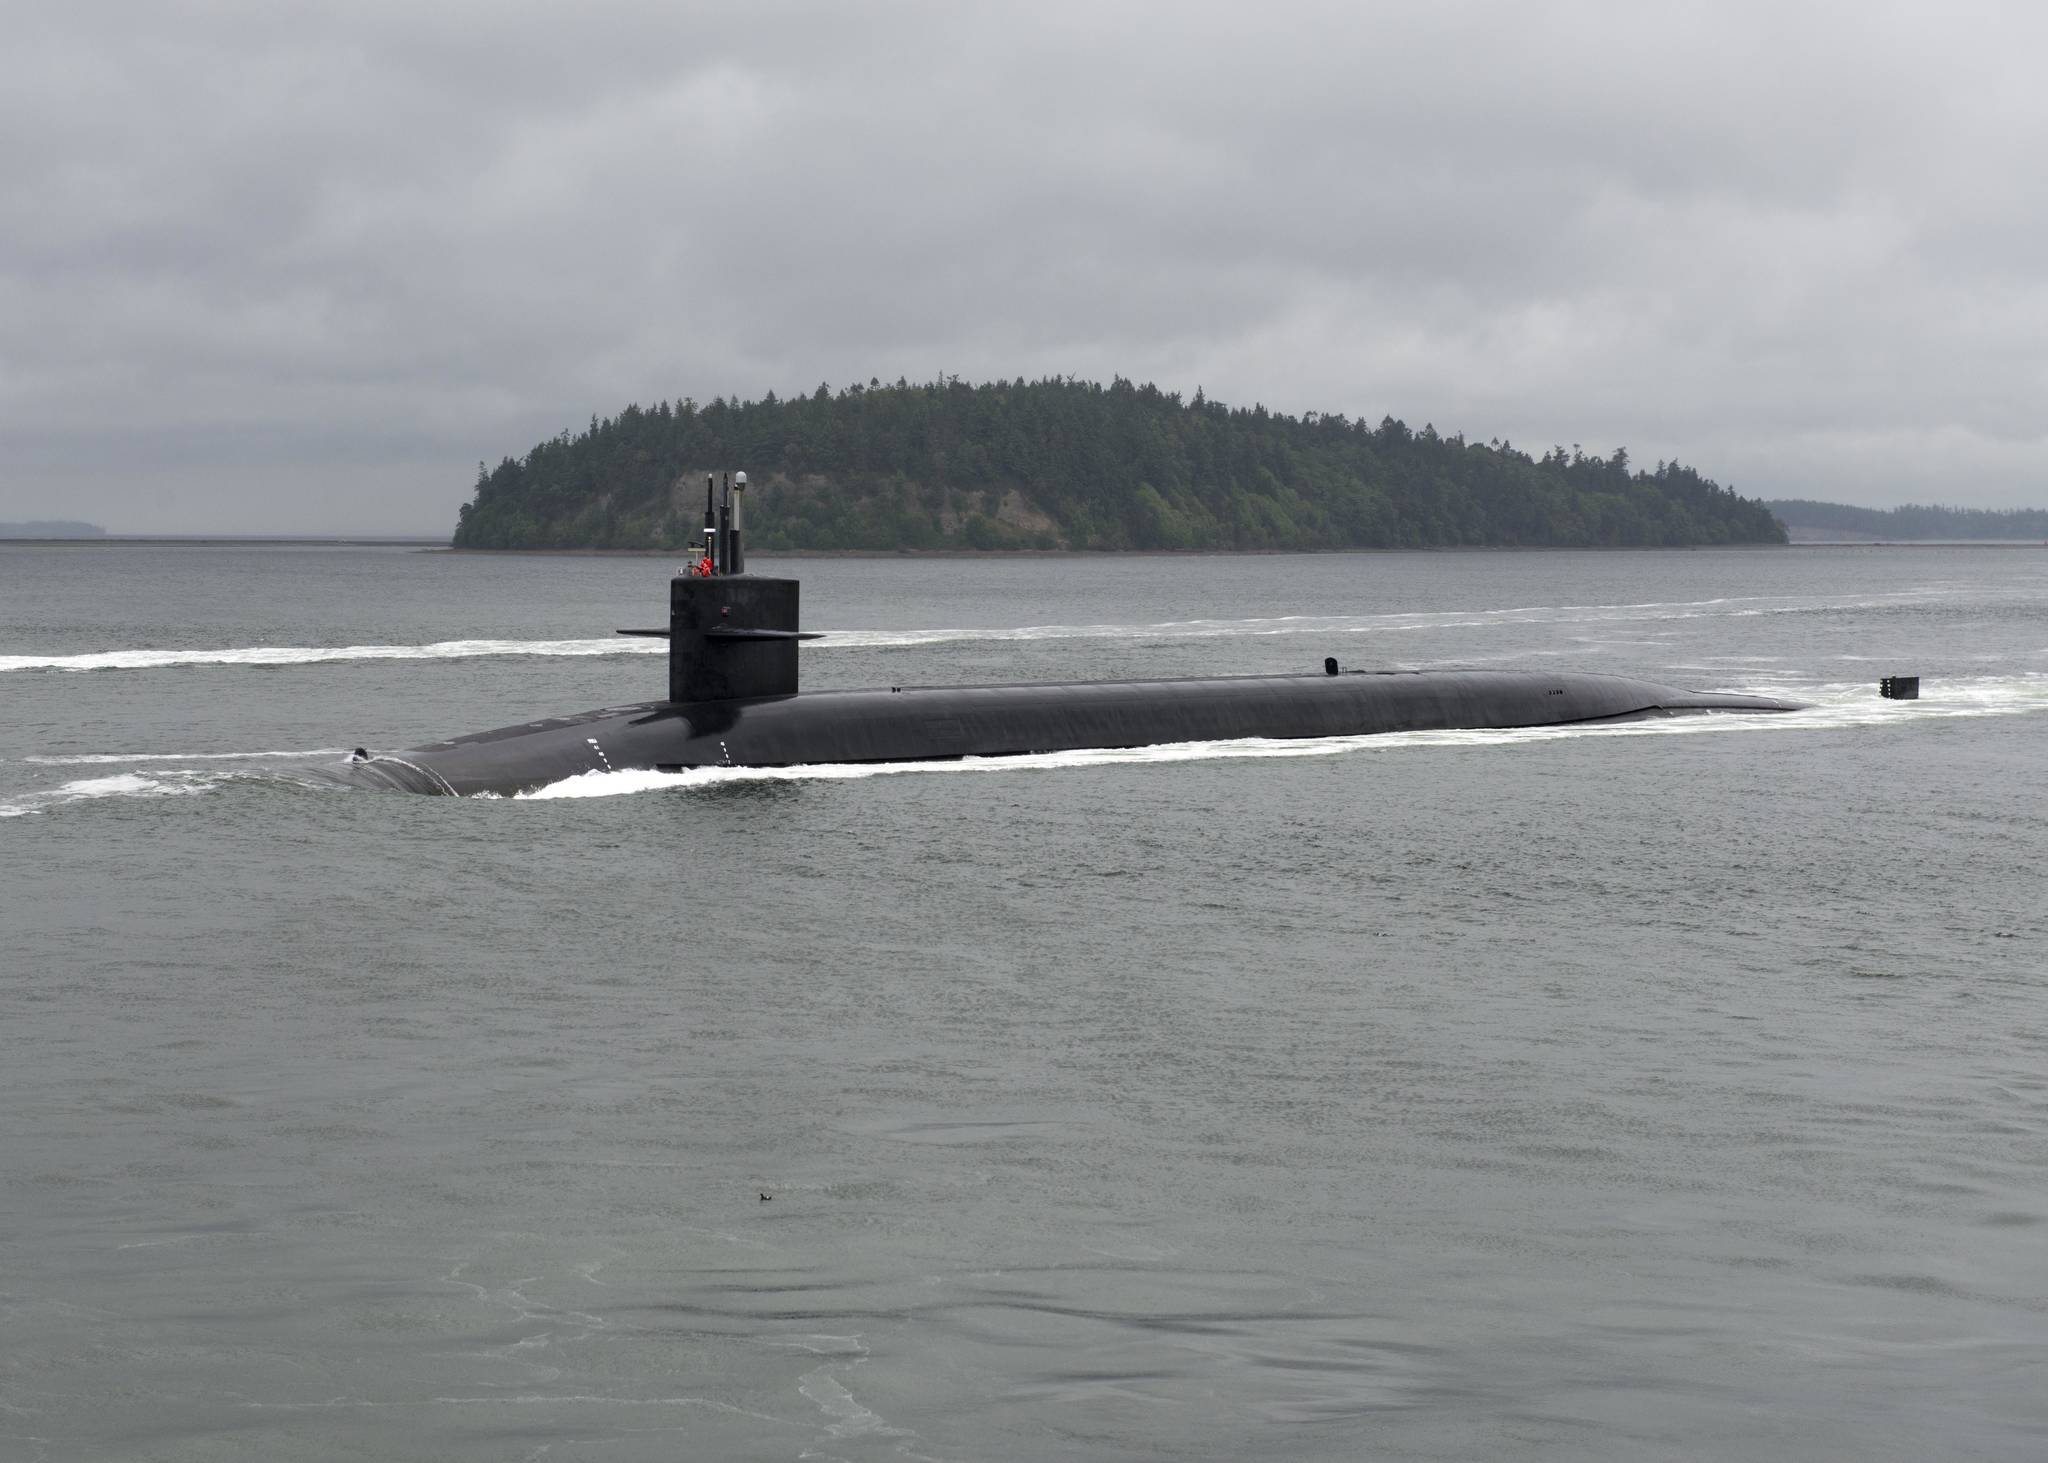 The Ohio-class ballistic-missile submarine USS Kentucky transits the Hood Canal on June 15 as it returns to Naval Base Kitsap, following a strategic deterrent patrol. Defense Secretary Jim Mattis will meet with the submarine’s crew during a visit to the base. Petty Officer 1st Class Amanda R. Gray/U.S. Navy